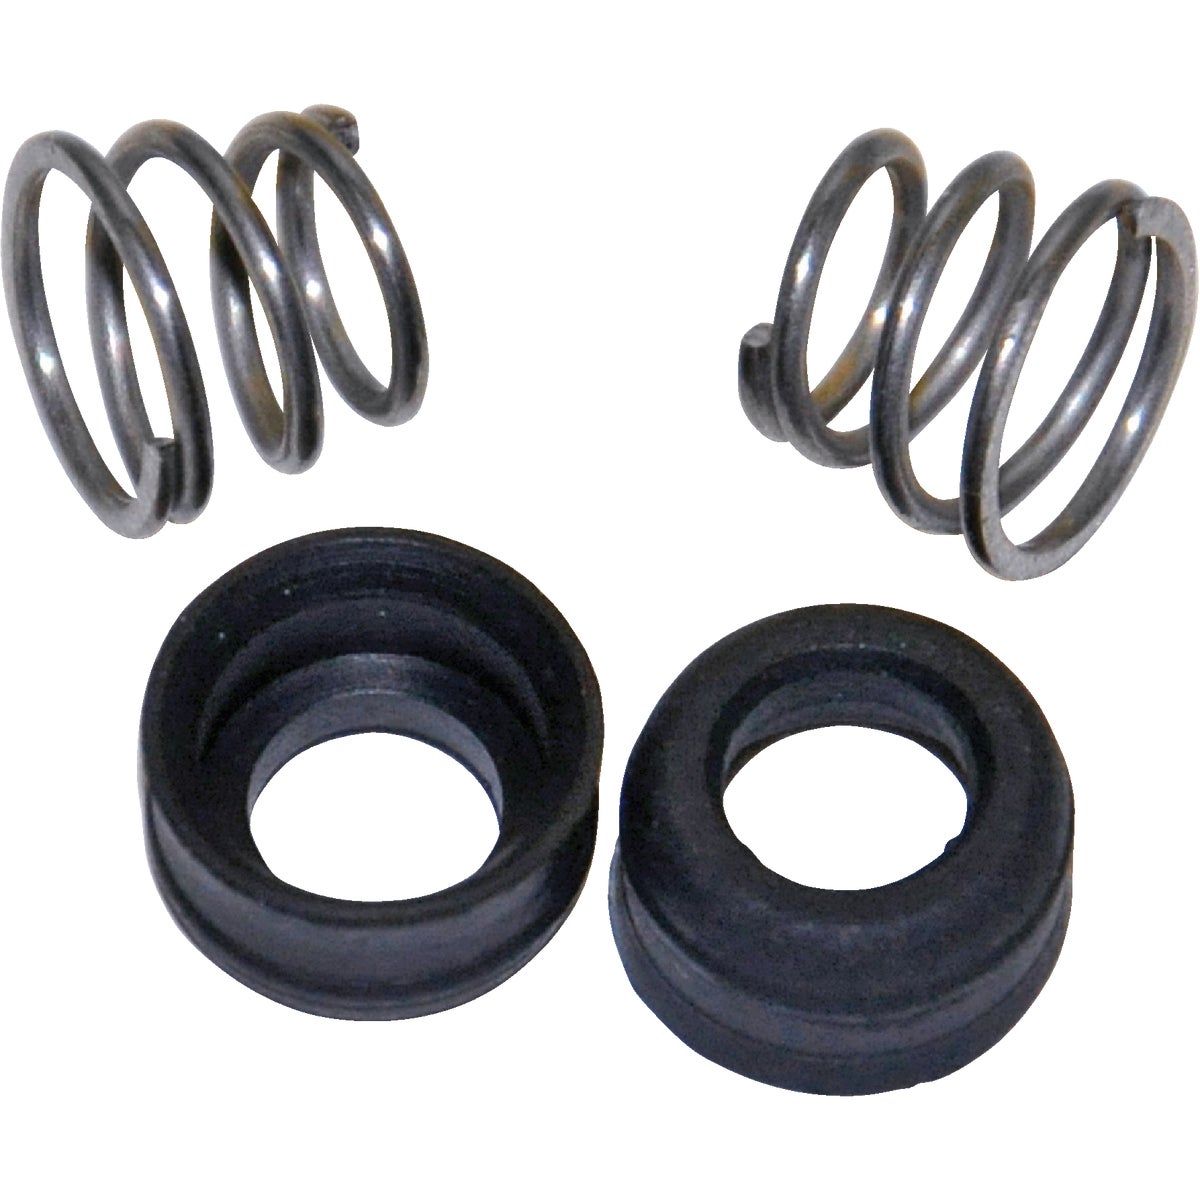 Item 413617, Seats and springs for Delta faucet repairs. Conical springs, short seats.